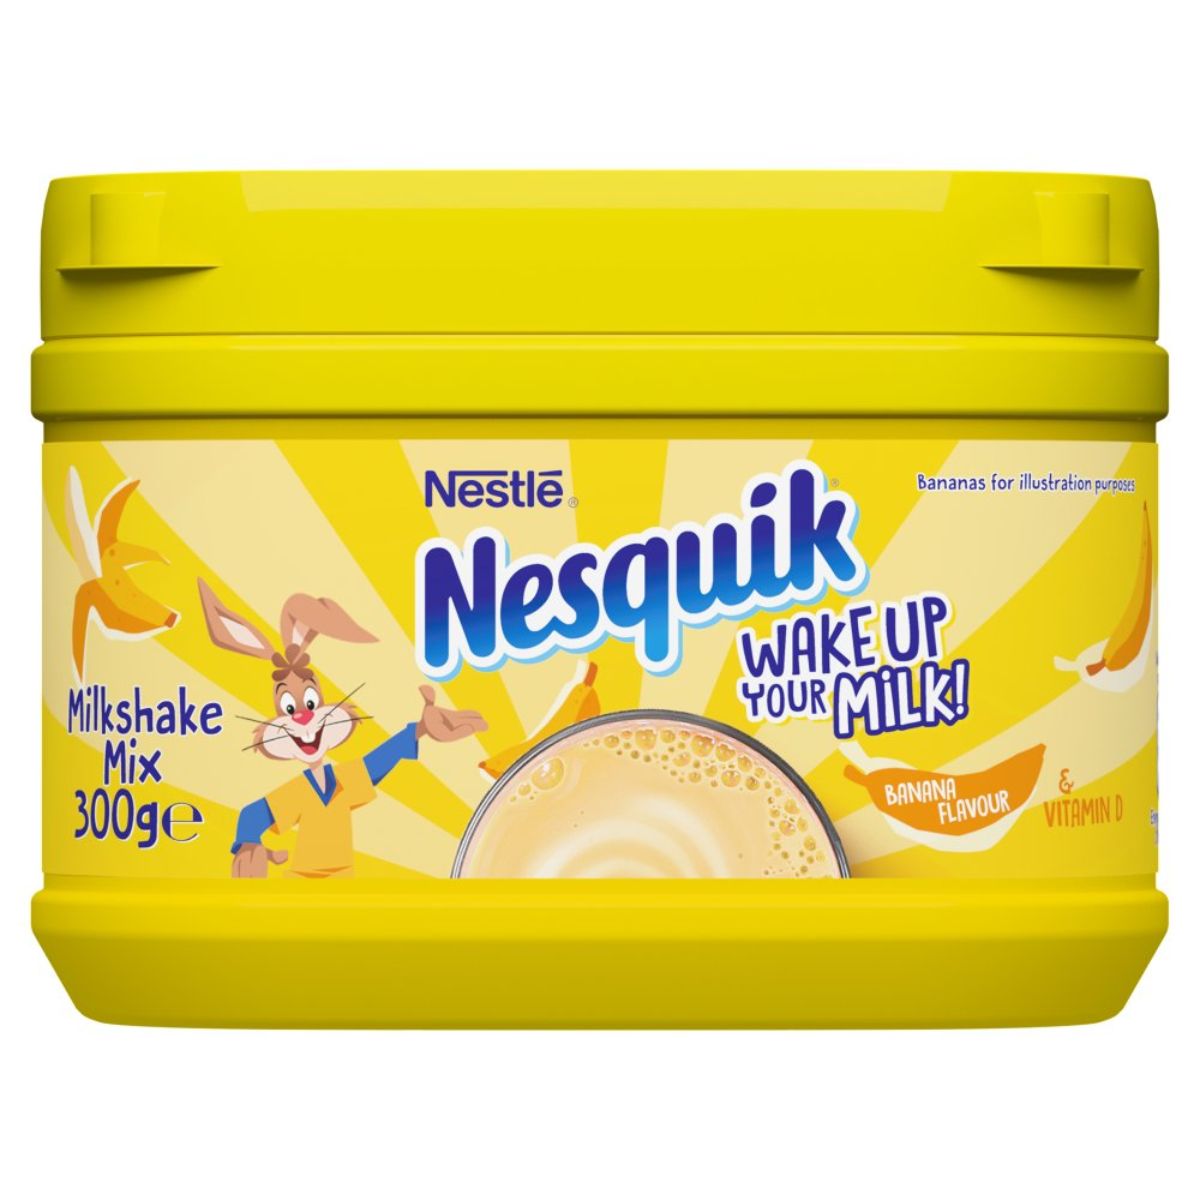 A container of Nestle - Nesquik Banana Flavoured Milkshake Powder - 300g makes up your failure.